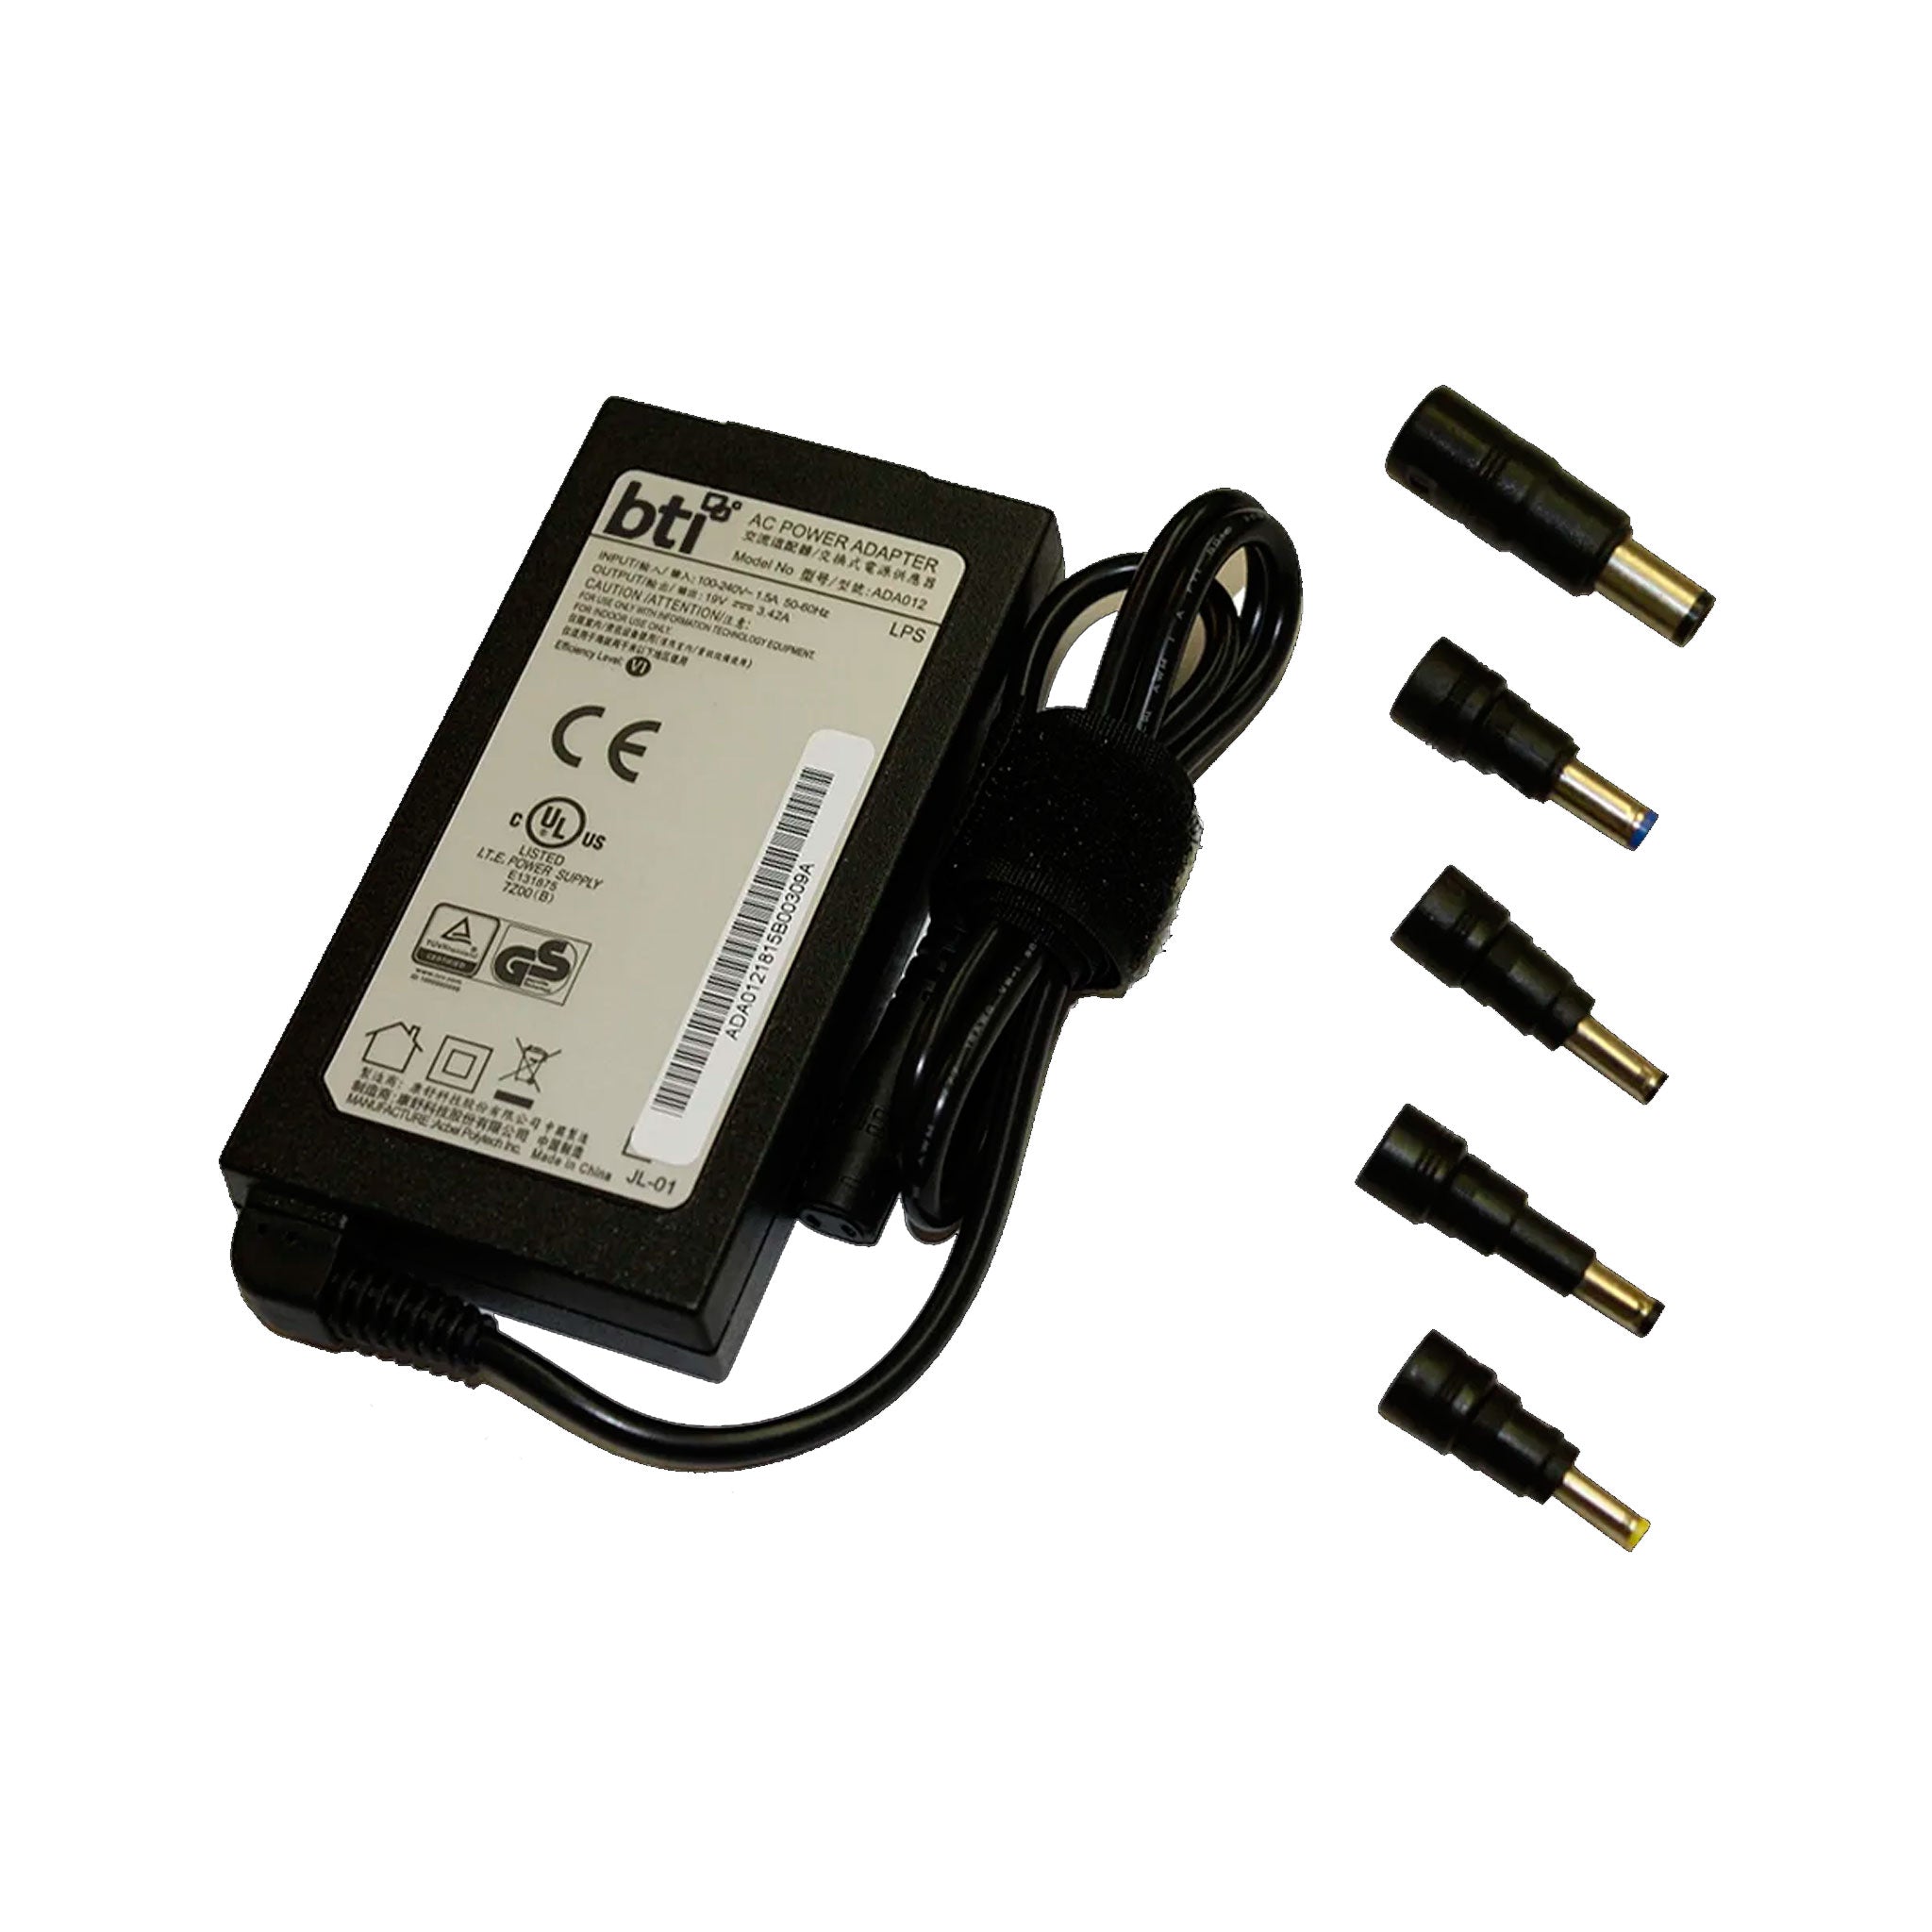 Bti - Ac Adapter 65w For Most Hp Devices Includes 5 Interchangeable Tips - Not Retail Packaged - Black